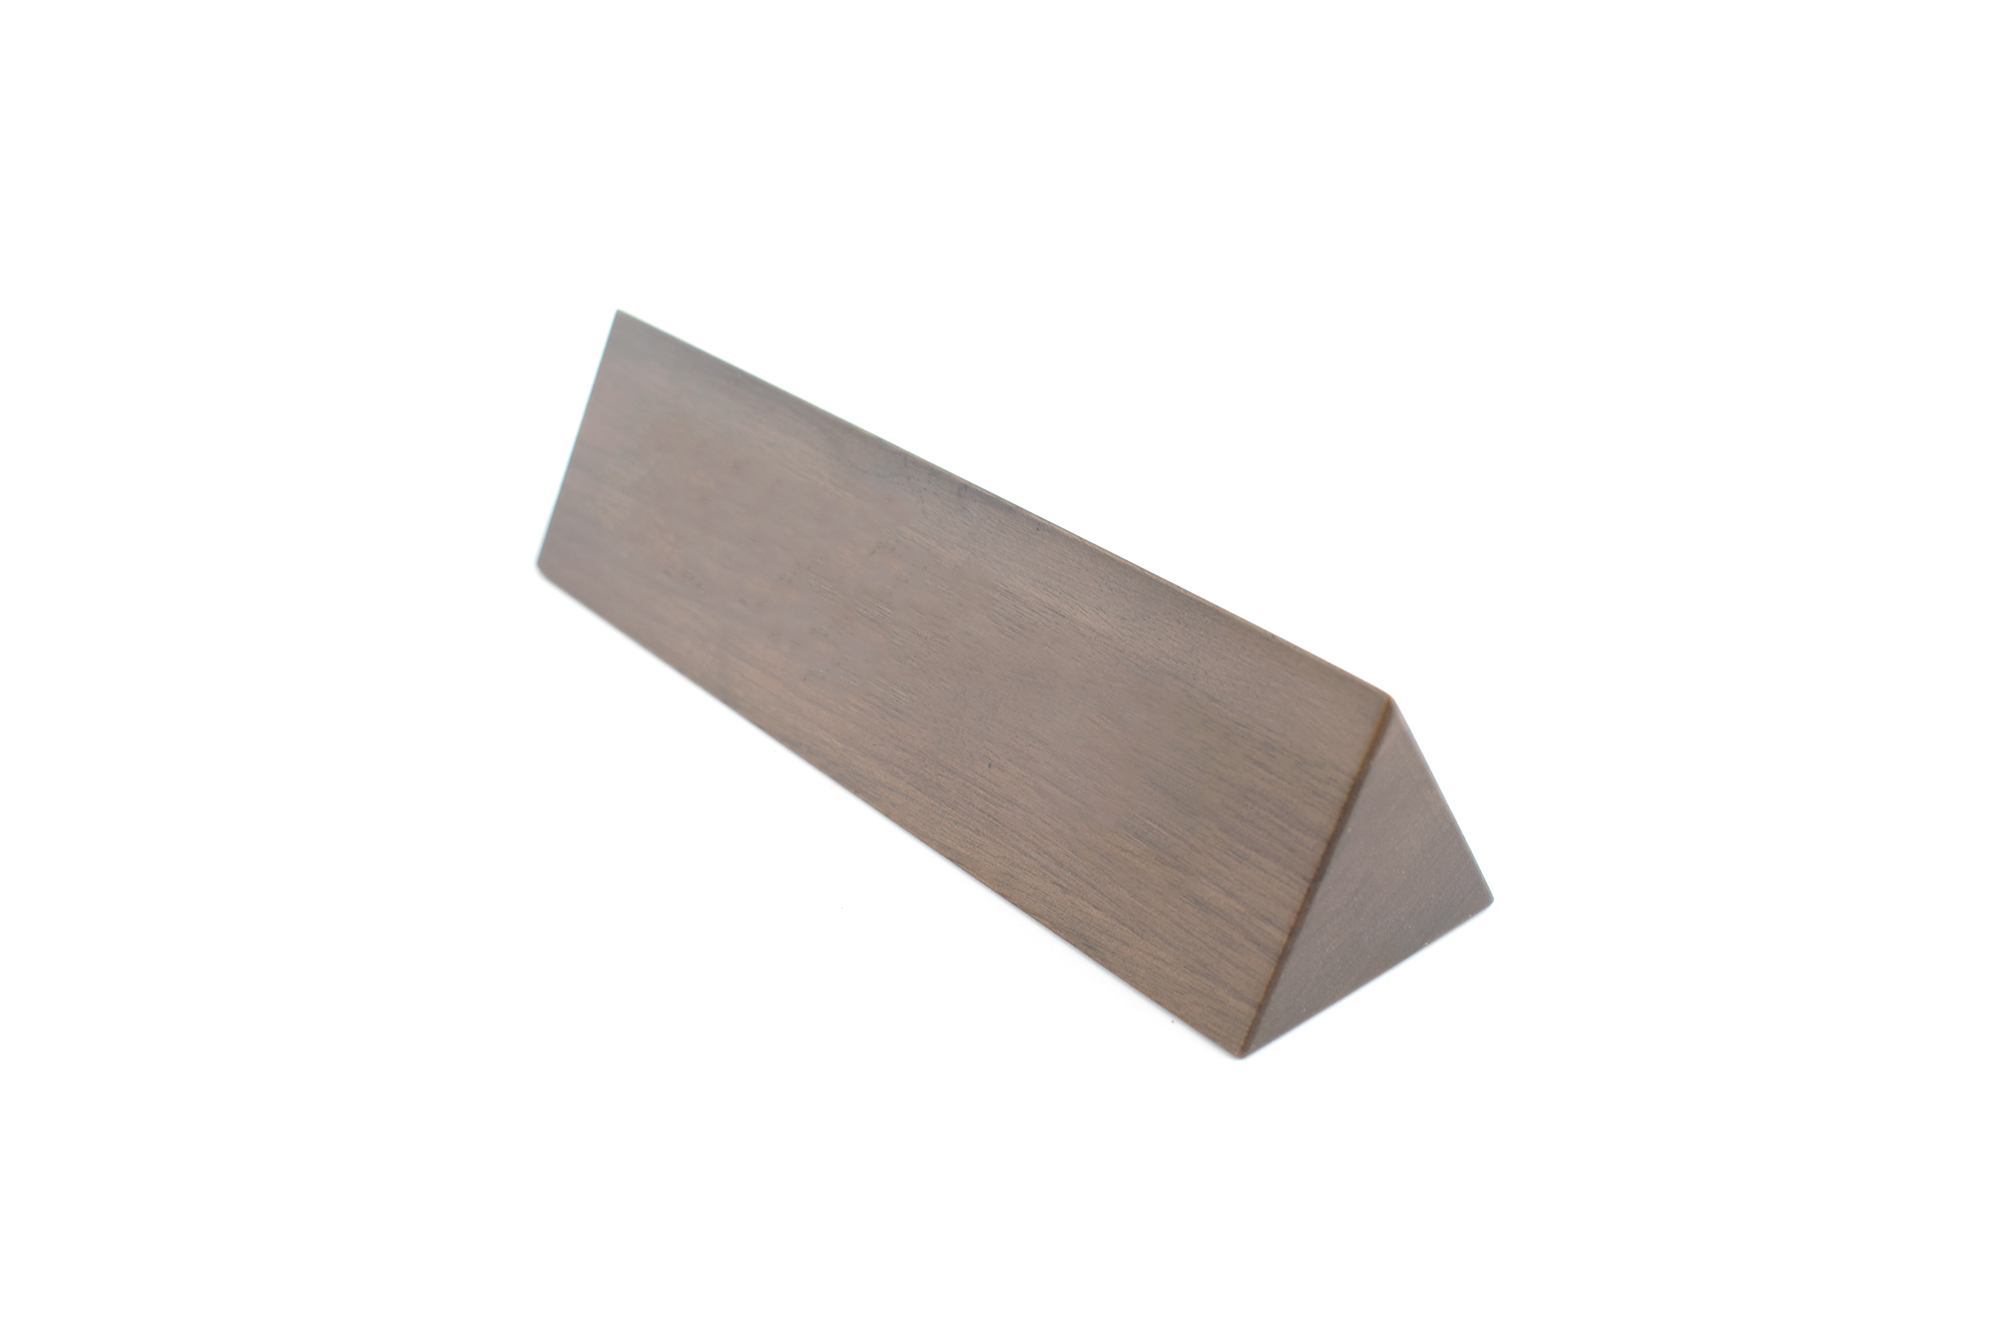 Solid triangle shape walnut wood block with lacquer finish